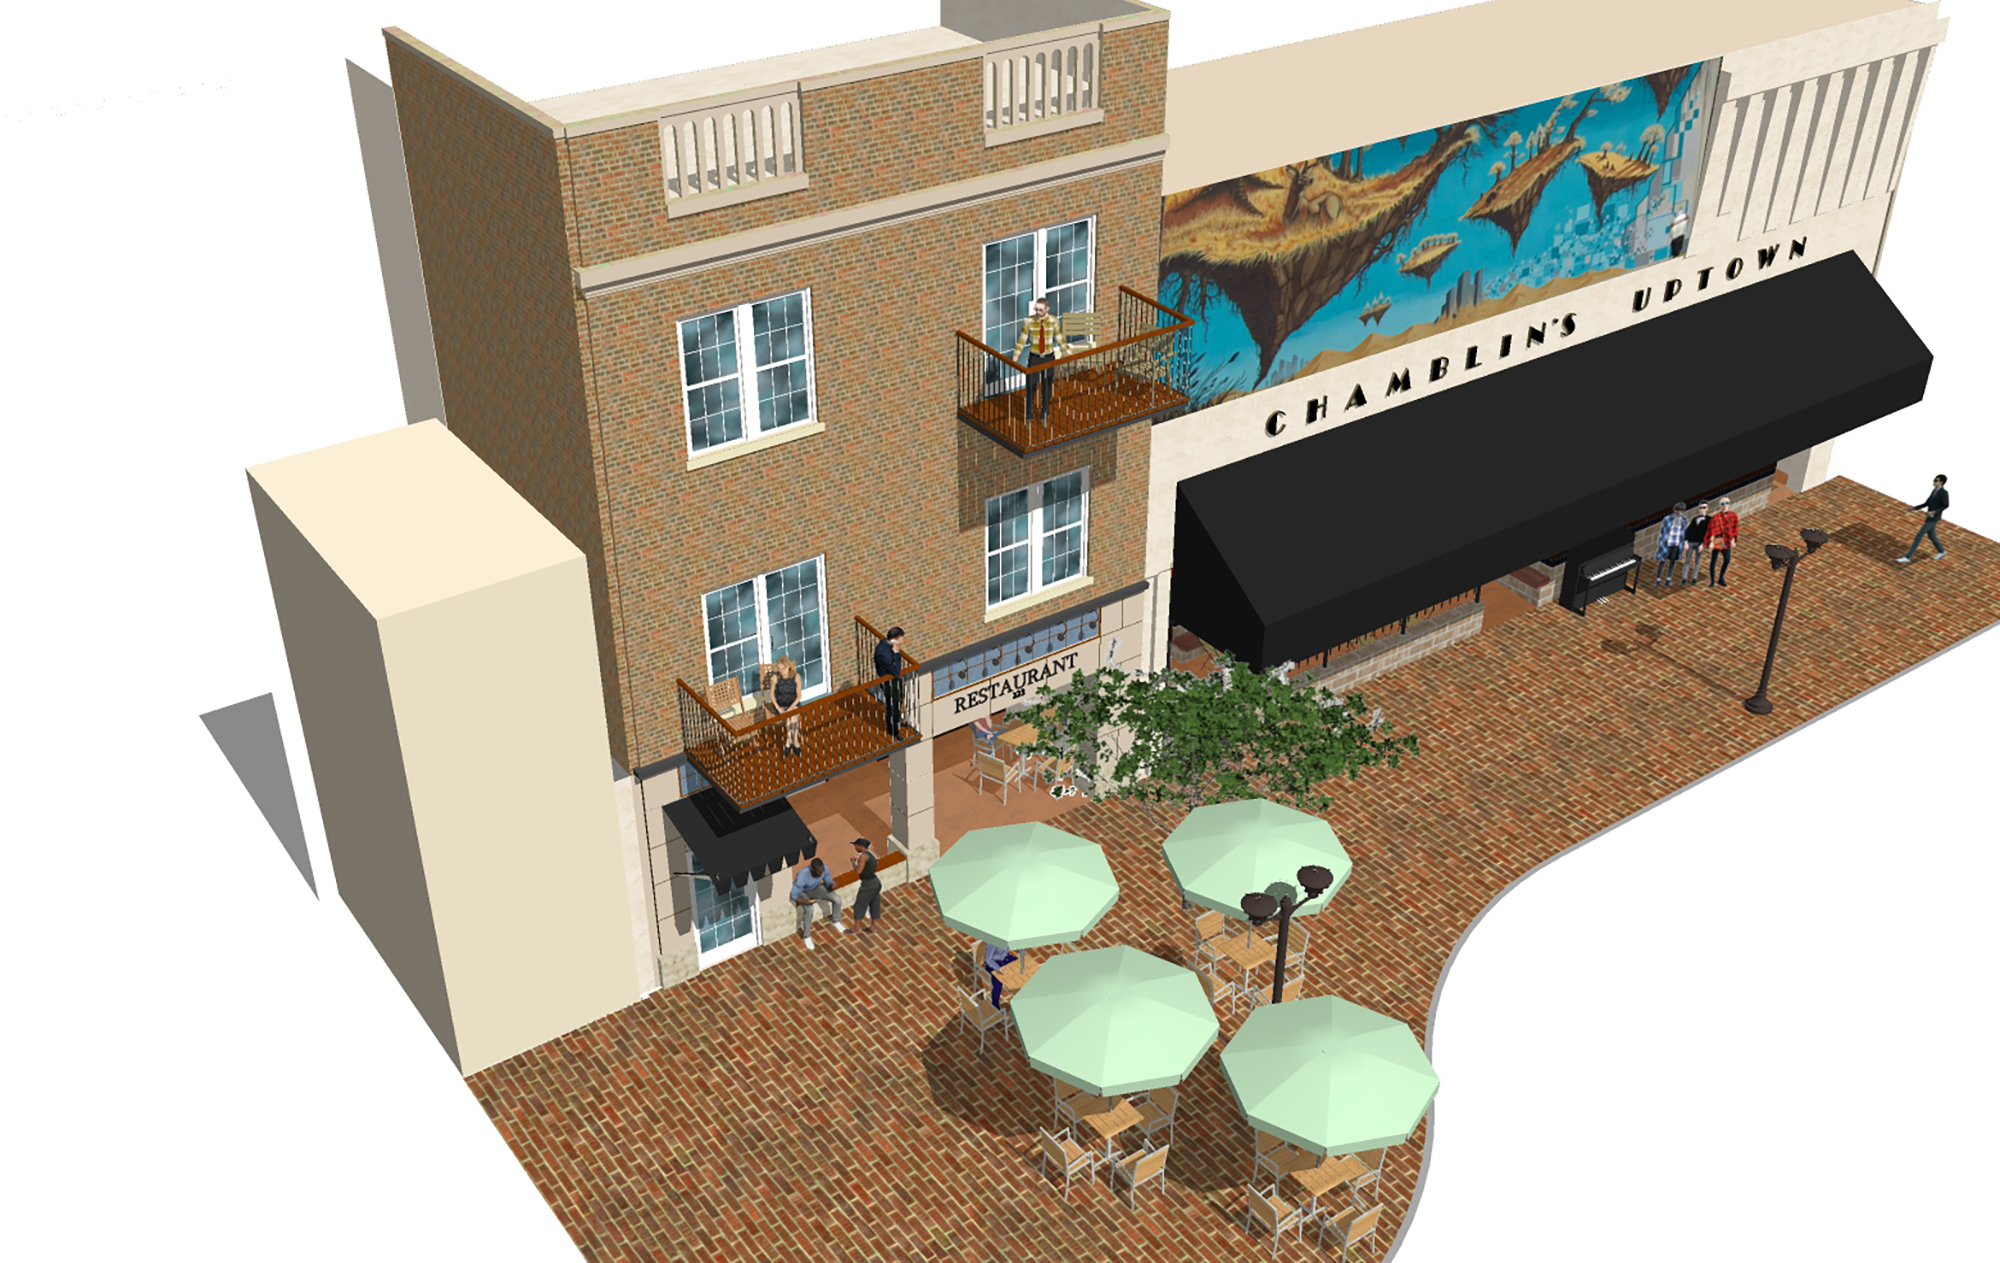 A rendering of the apartments and cafe.